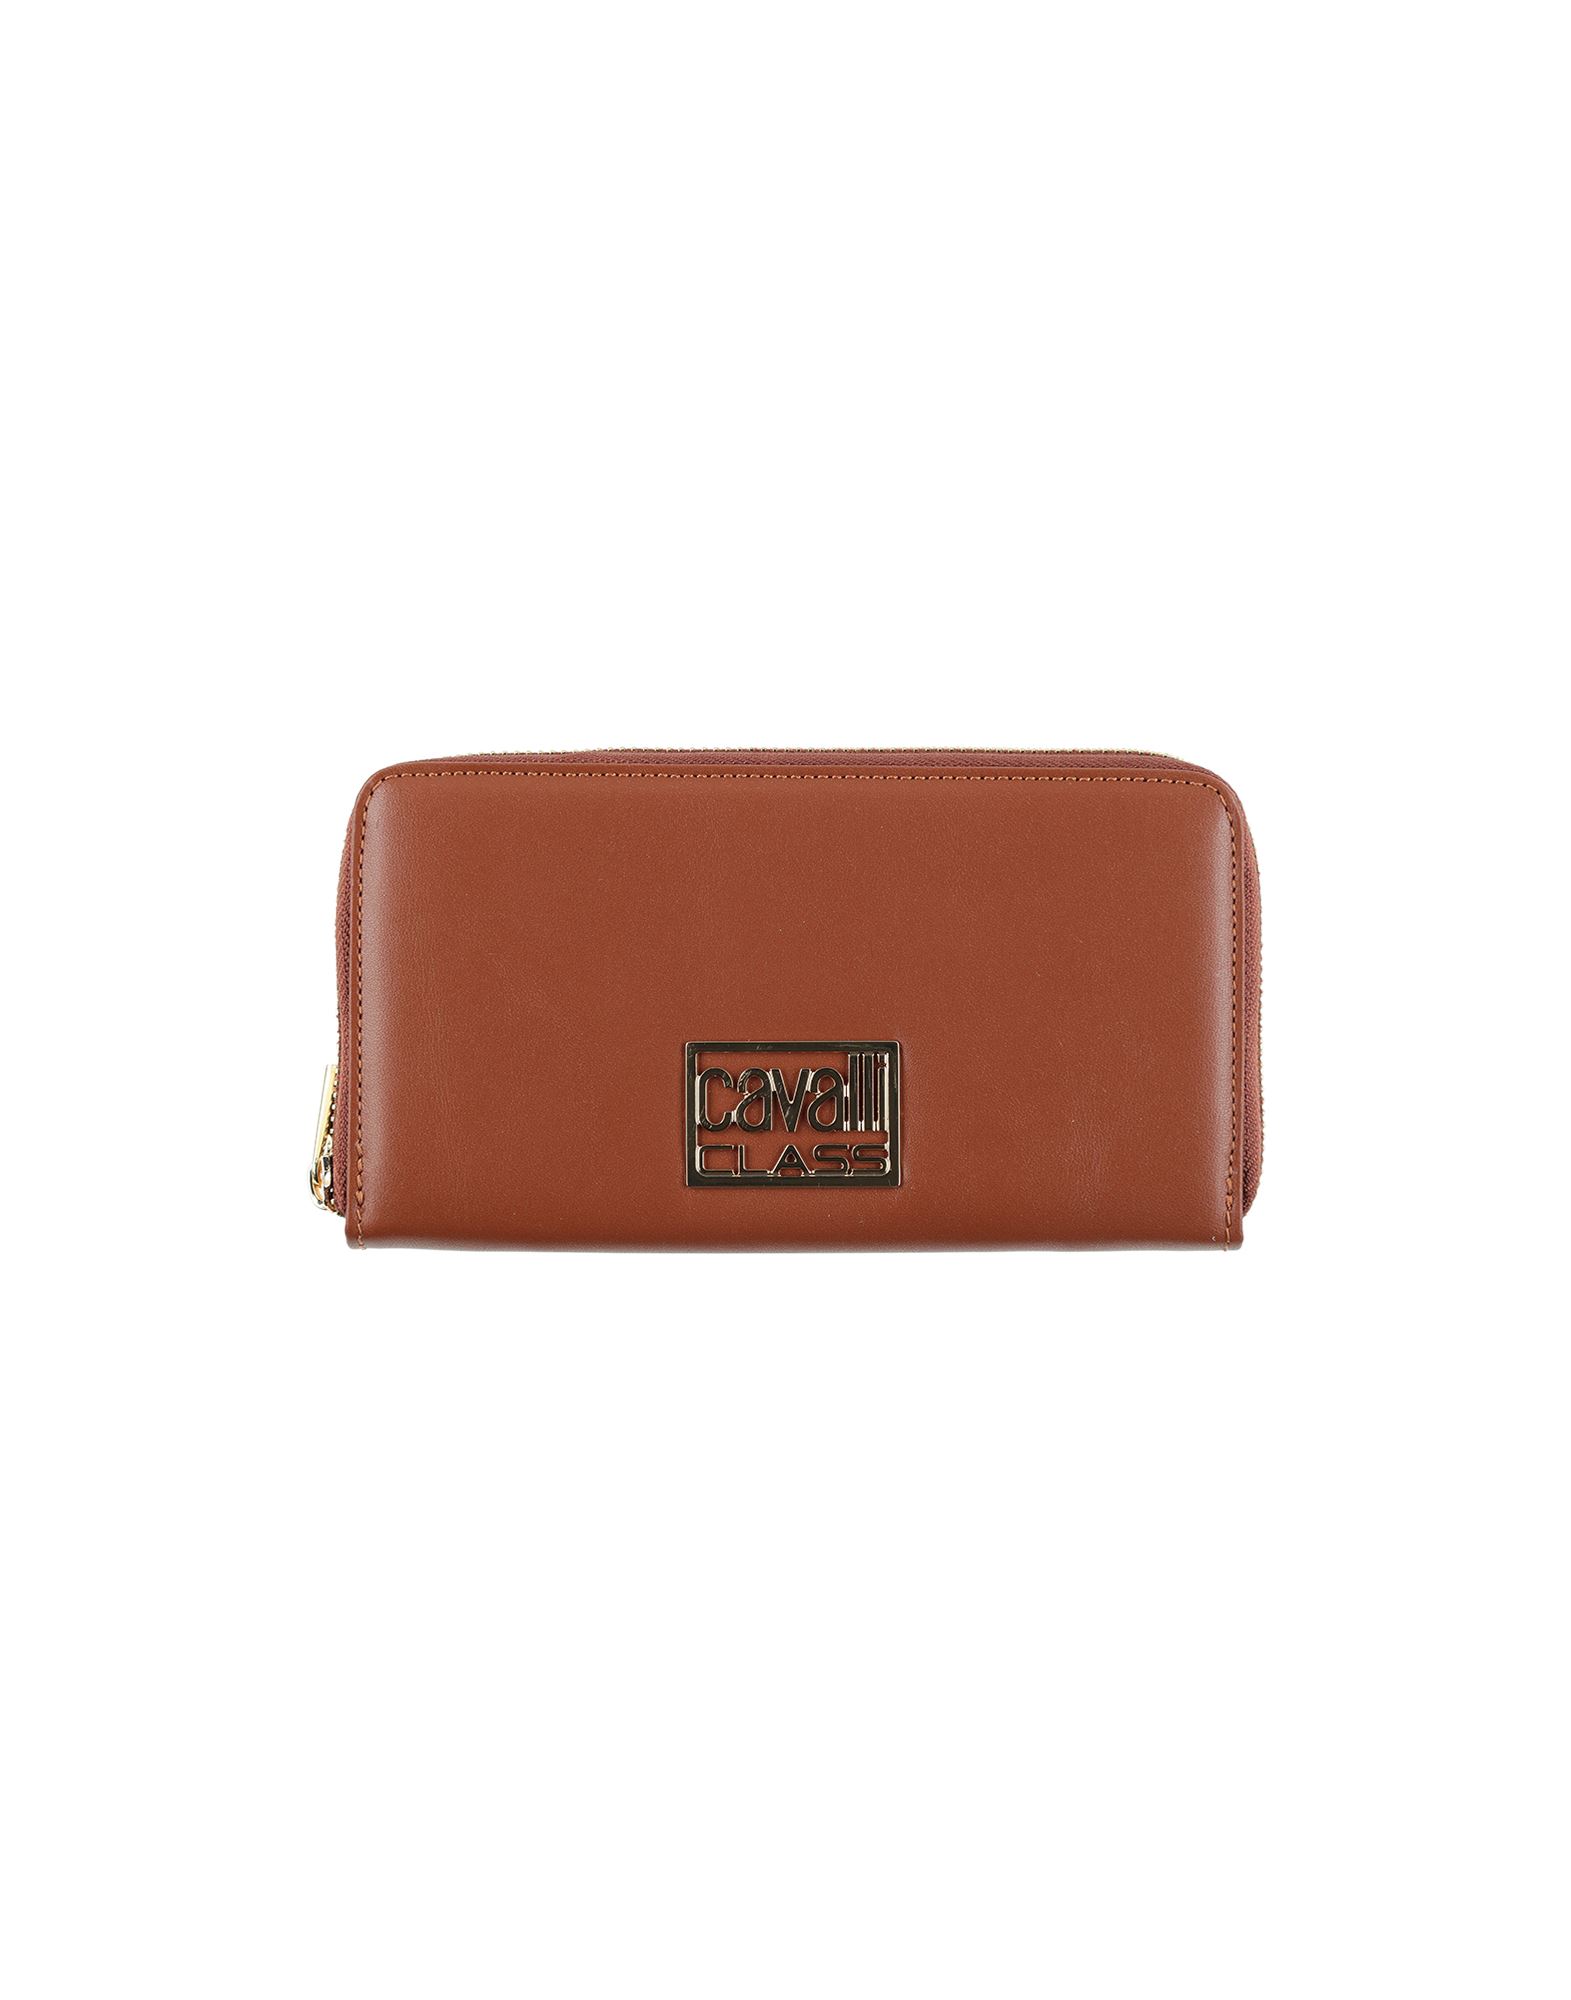 Cavalli Class Wallets In Brown